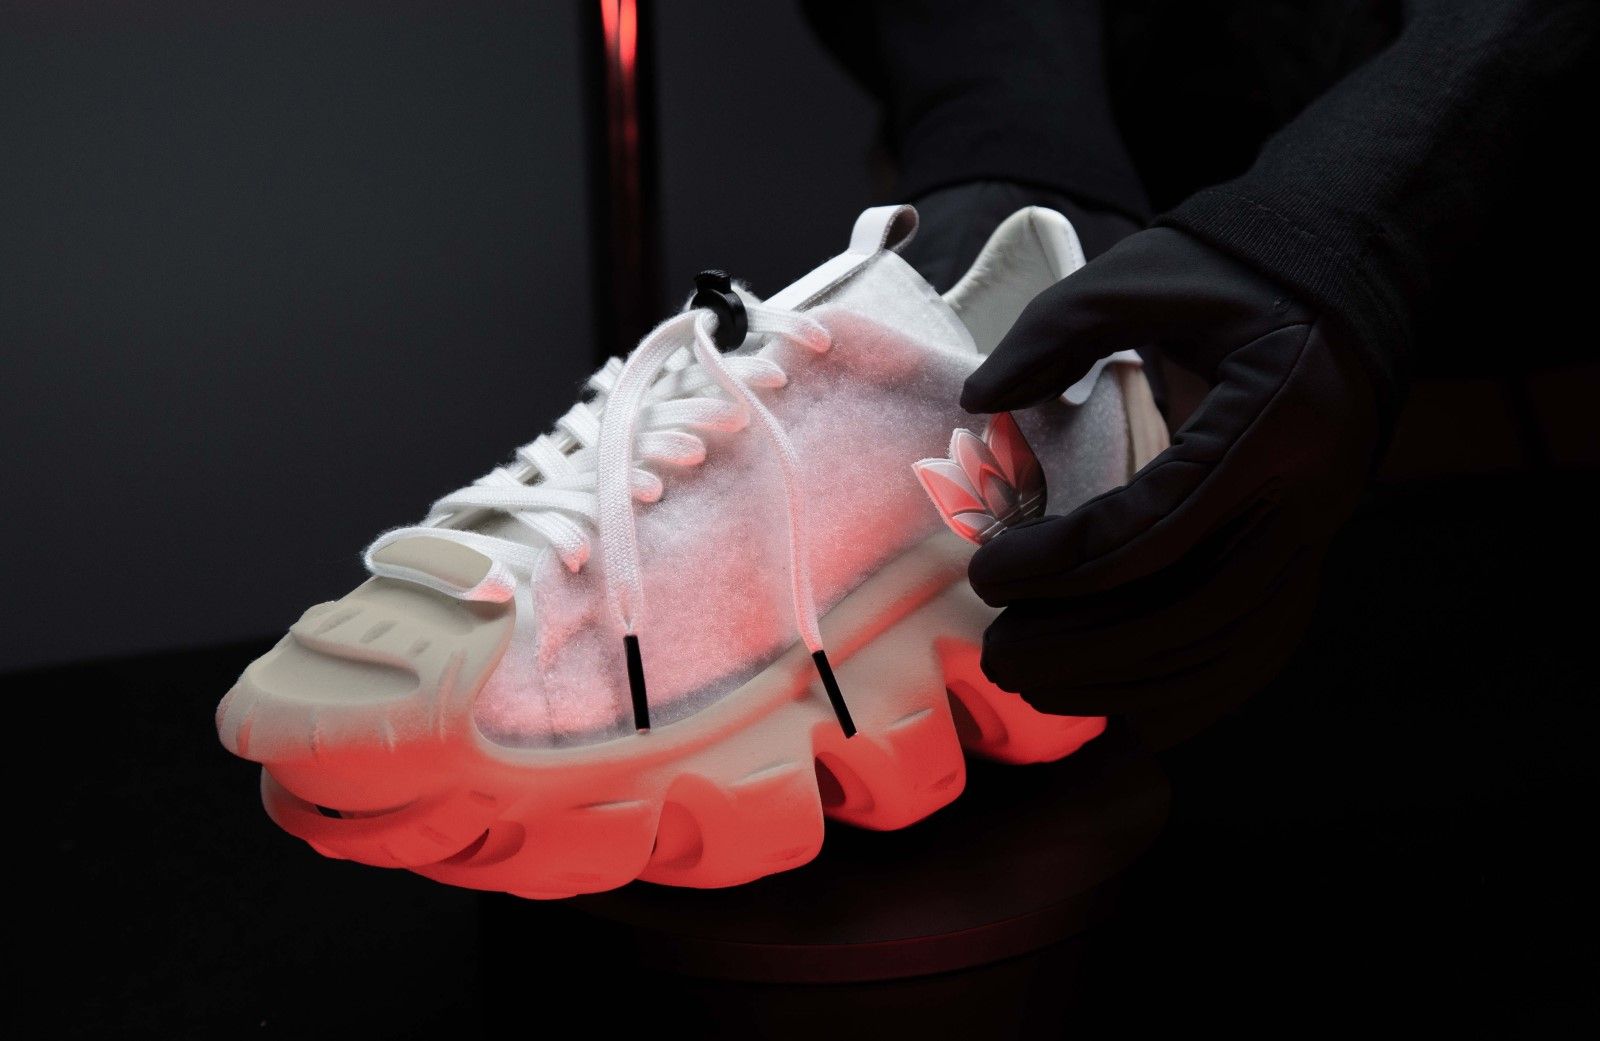 Runner Tatic is the new sneaker from Louis Vuitton - HIGHXTAR.